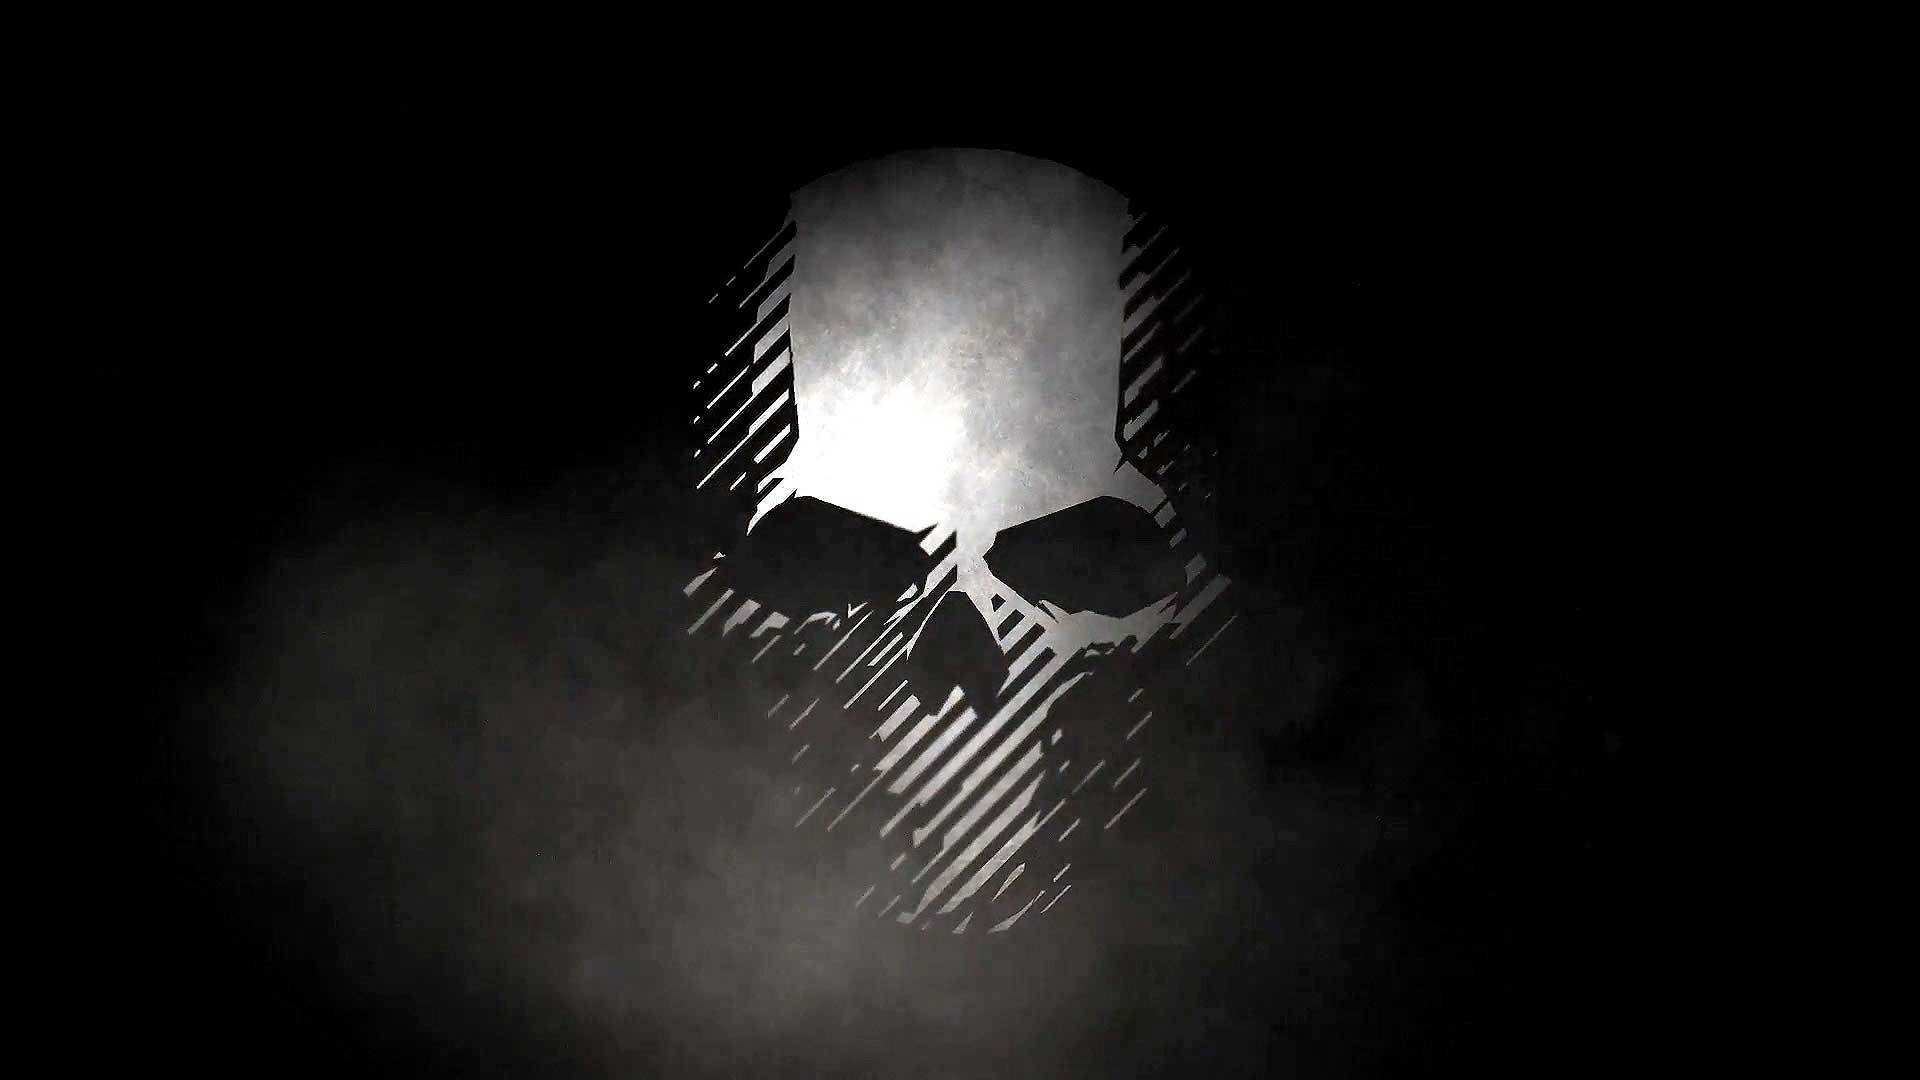 Ghost Recon Breakpoint Leaked Ahead of its Official Reveal